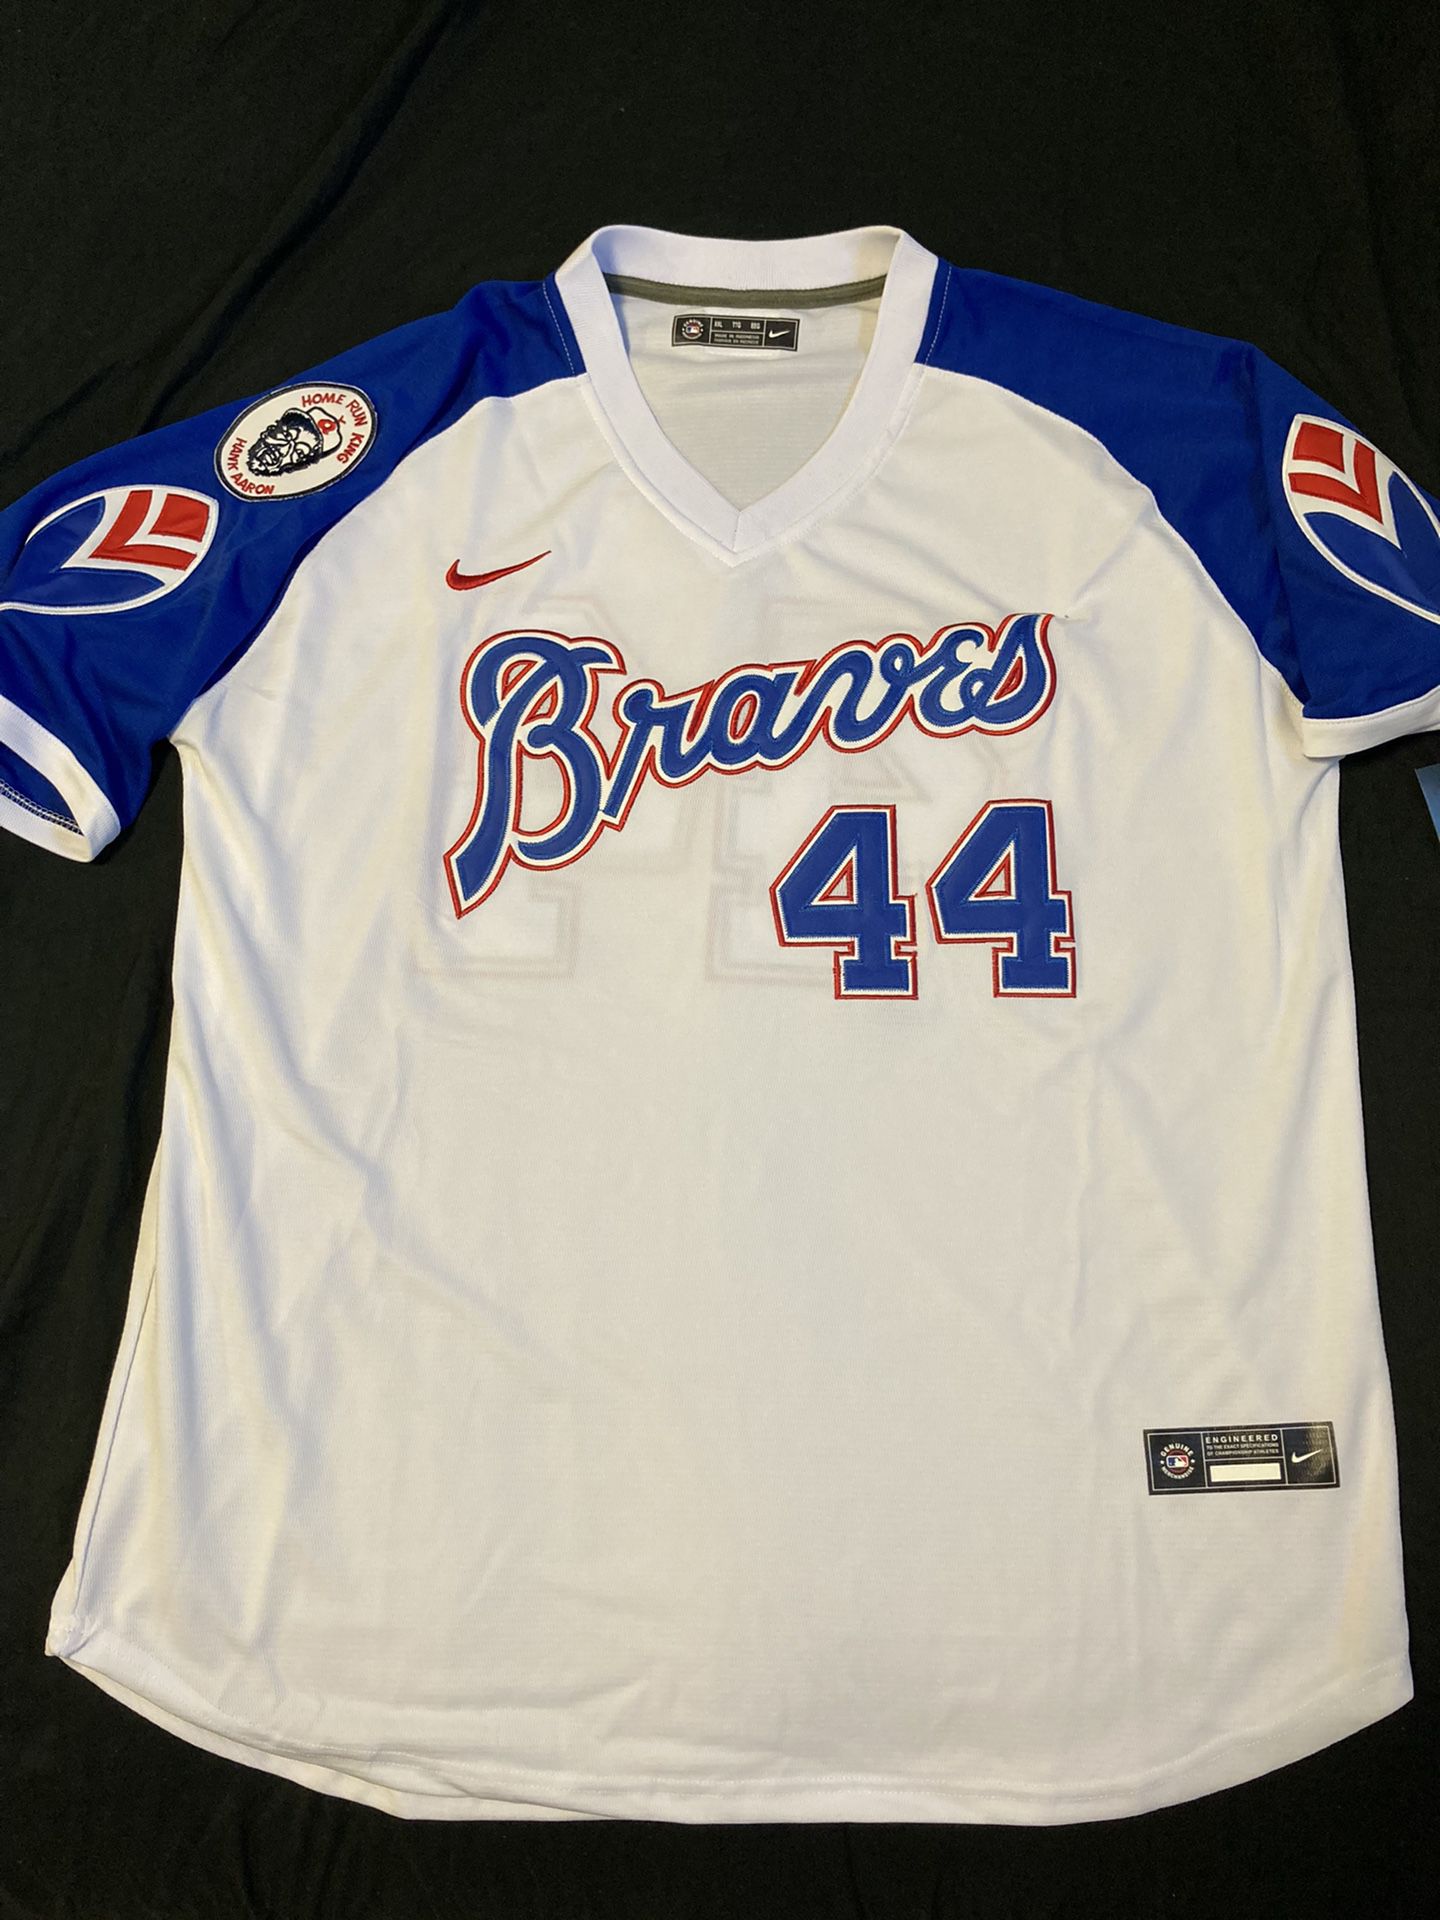 Braves H. Aaron Jersey for Sale in Houston, TX - OfferUp